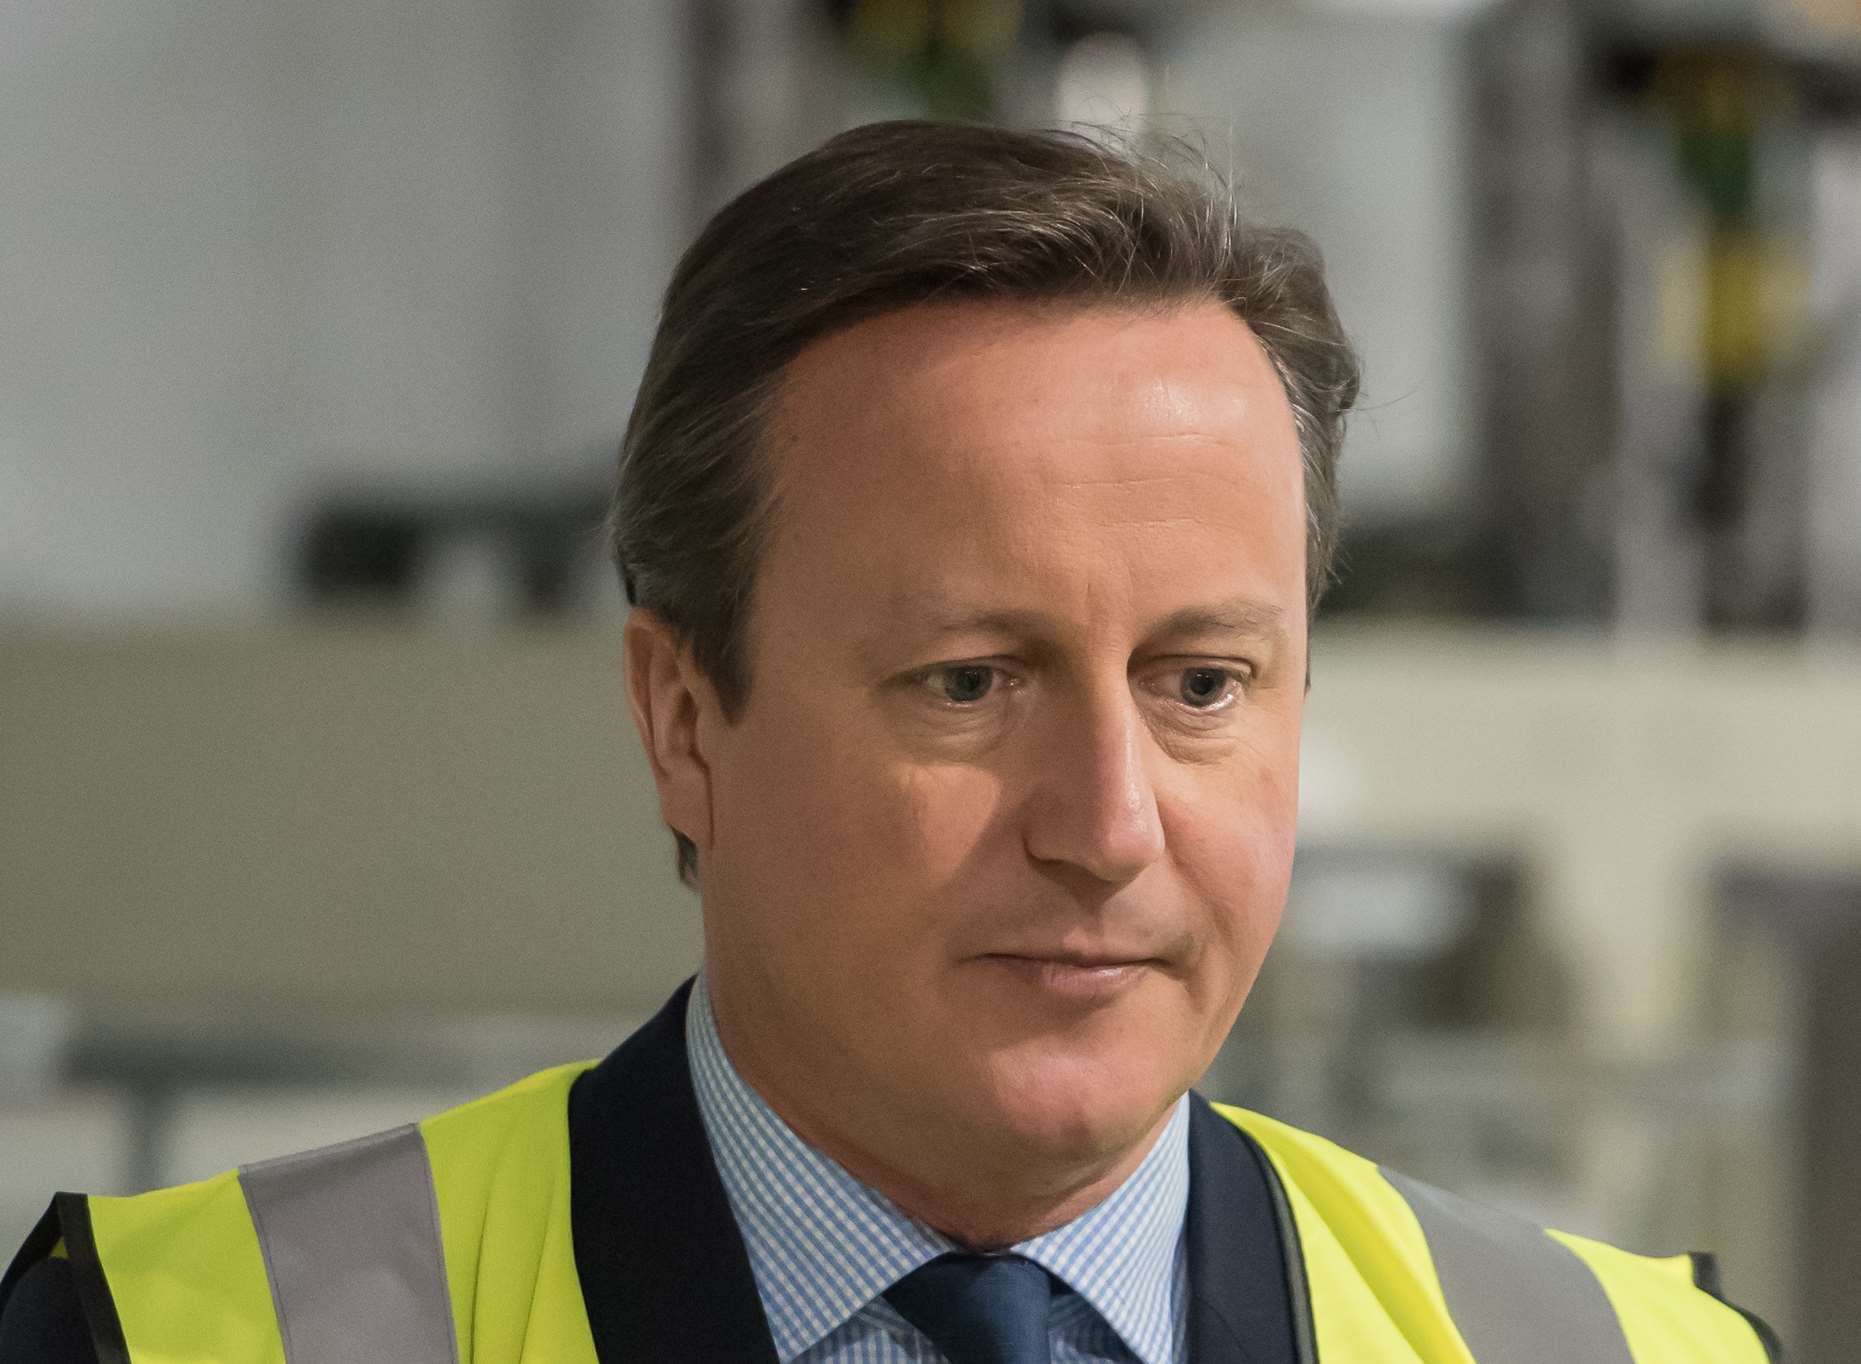 Prime Minister David Cameron is leading the Remain camp